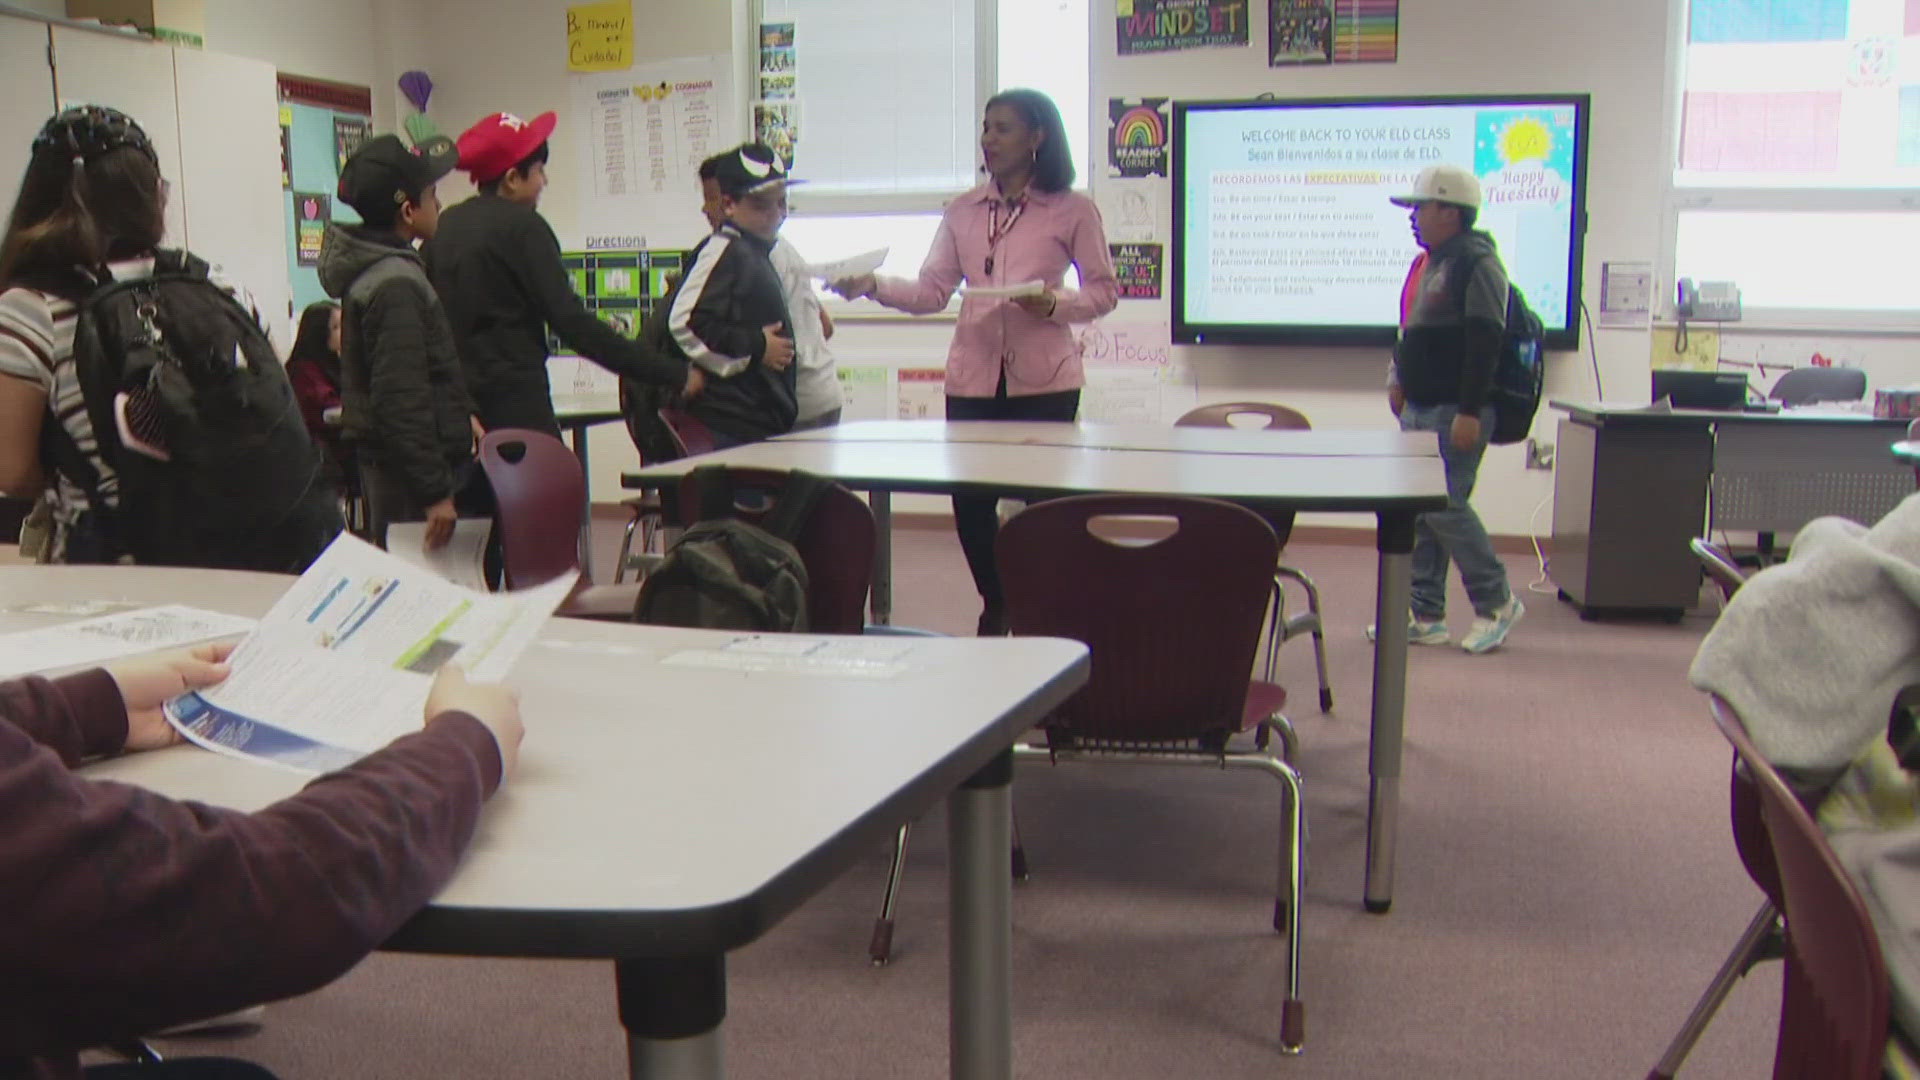 Denver Public Schools is getting creative to fill teaching positions by bringing in educators from around the world.